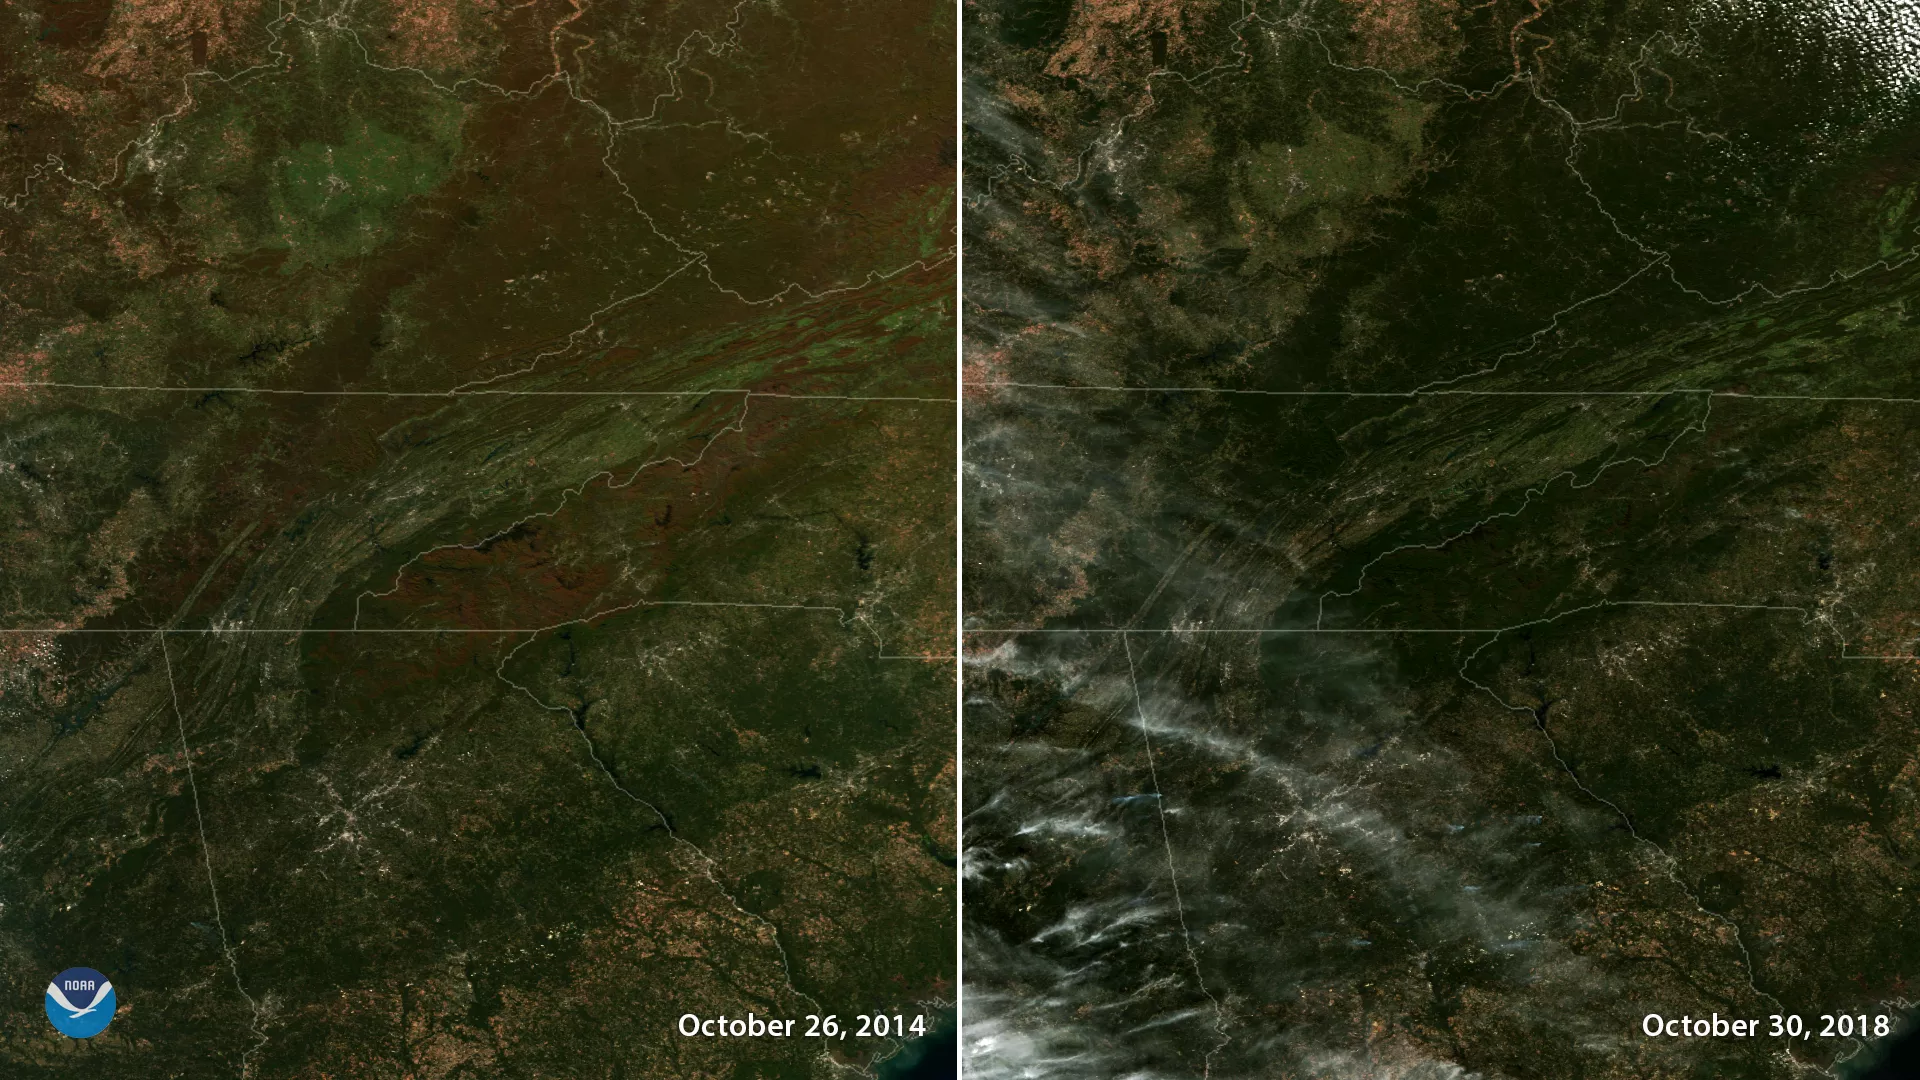 side-by-side satellite imagery shows peak foliage vs. more green, less advanced color change on the ground.